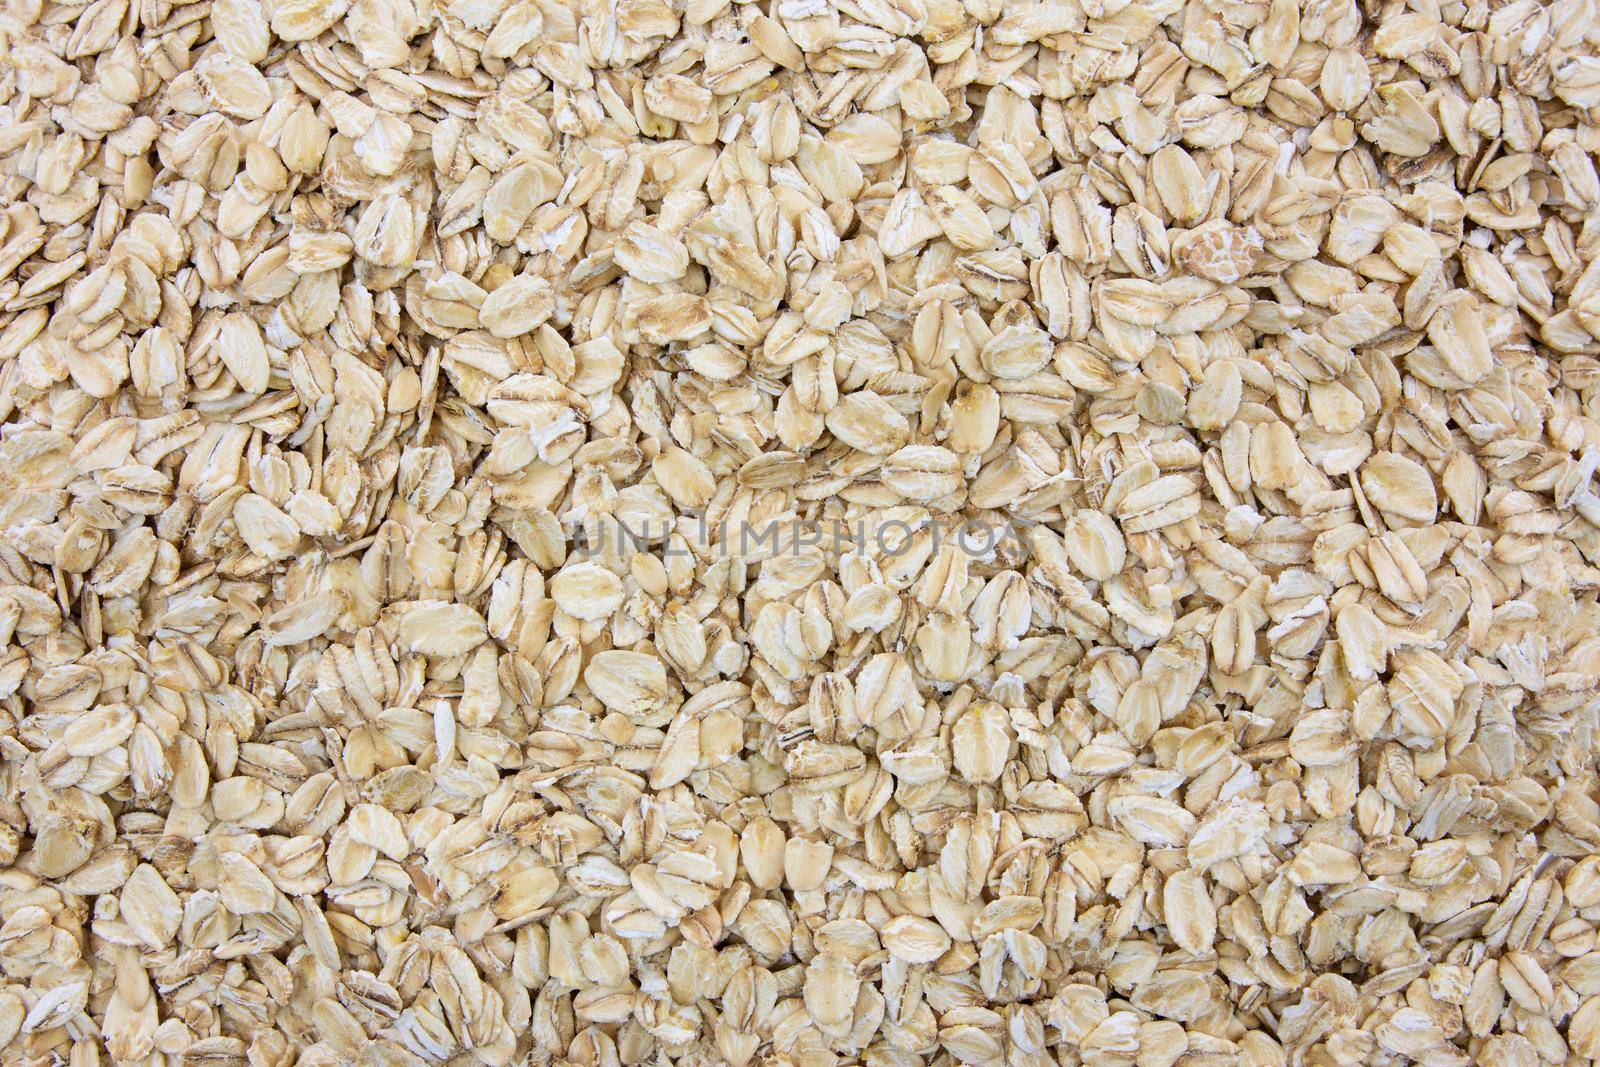 Top view of oatmeal flakes in close-up as a background or full frame texture (high details)